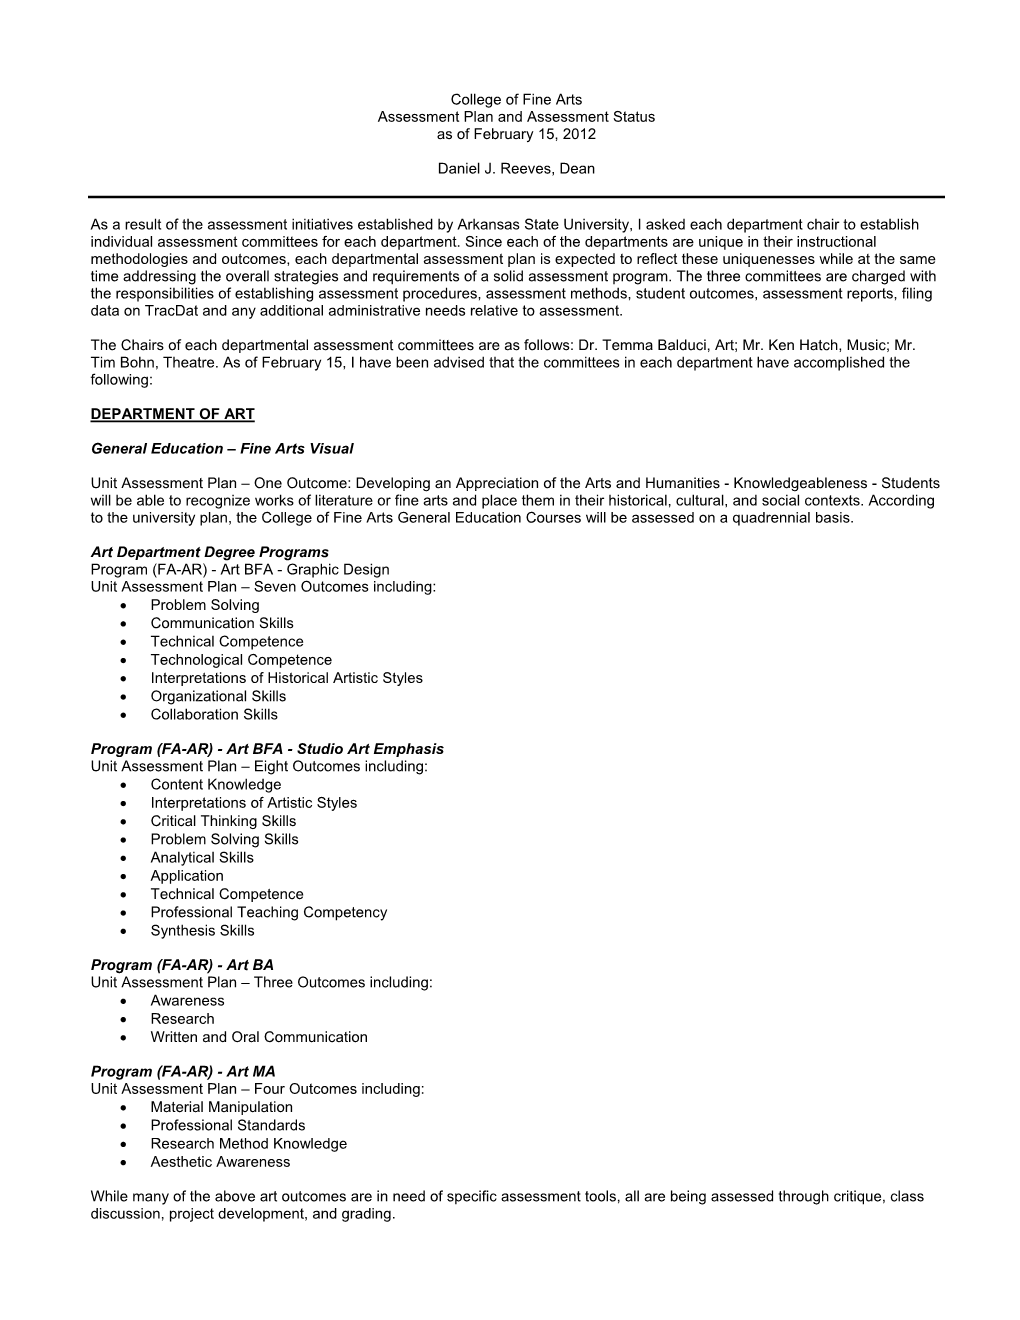 Fine Arts Assessment Plan and Assessment Status As of February 15, 2012